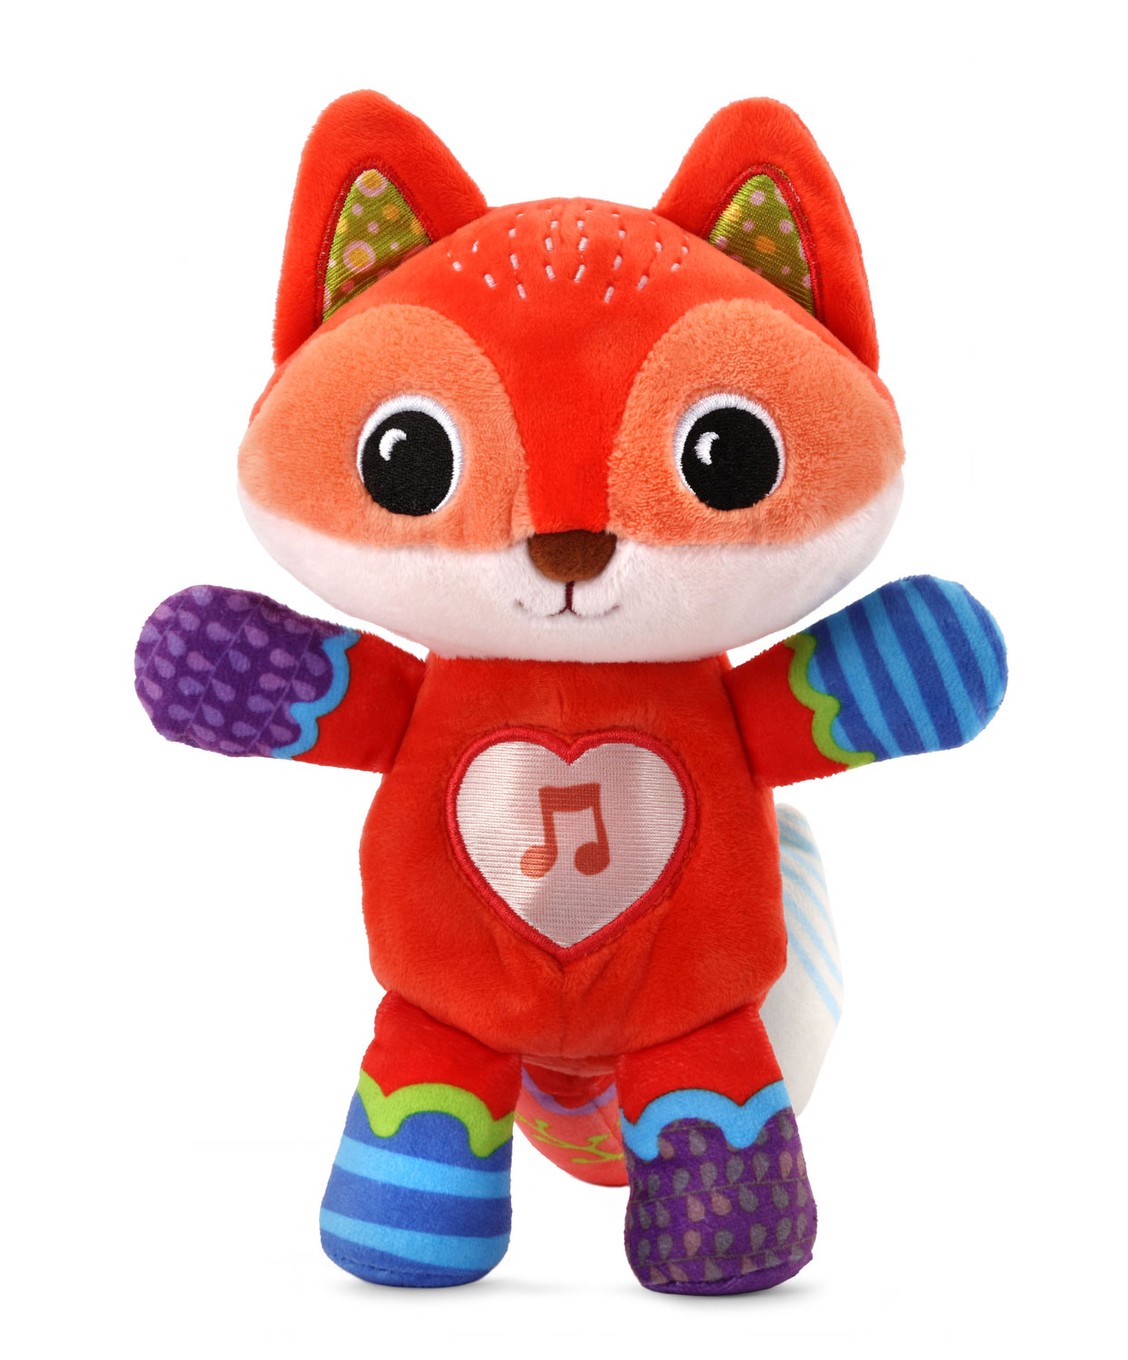 VTech® Soothing Songs Fox™ Cuddly Interactive Musical Toy